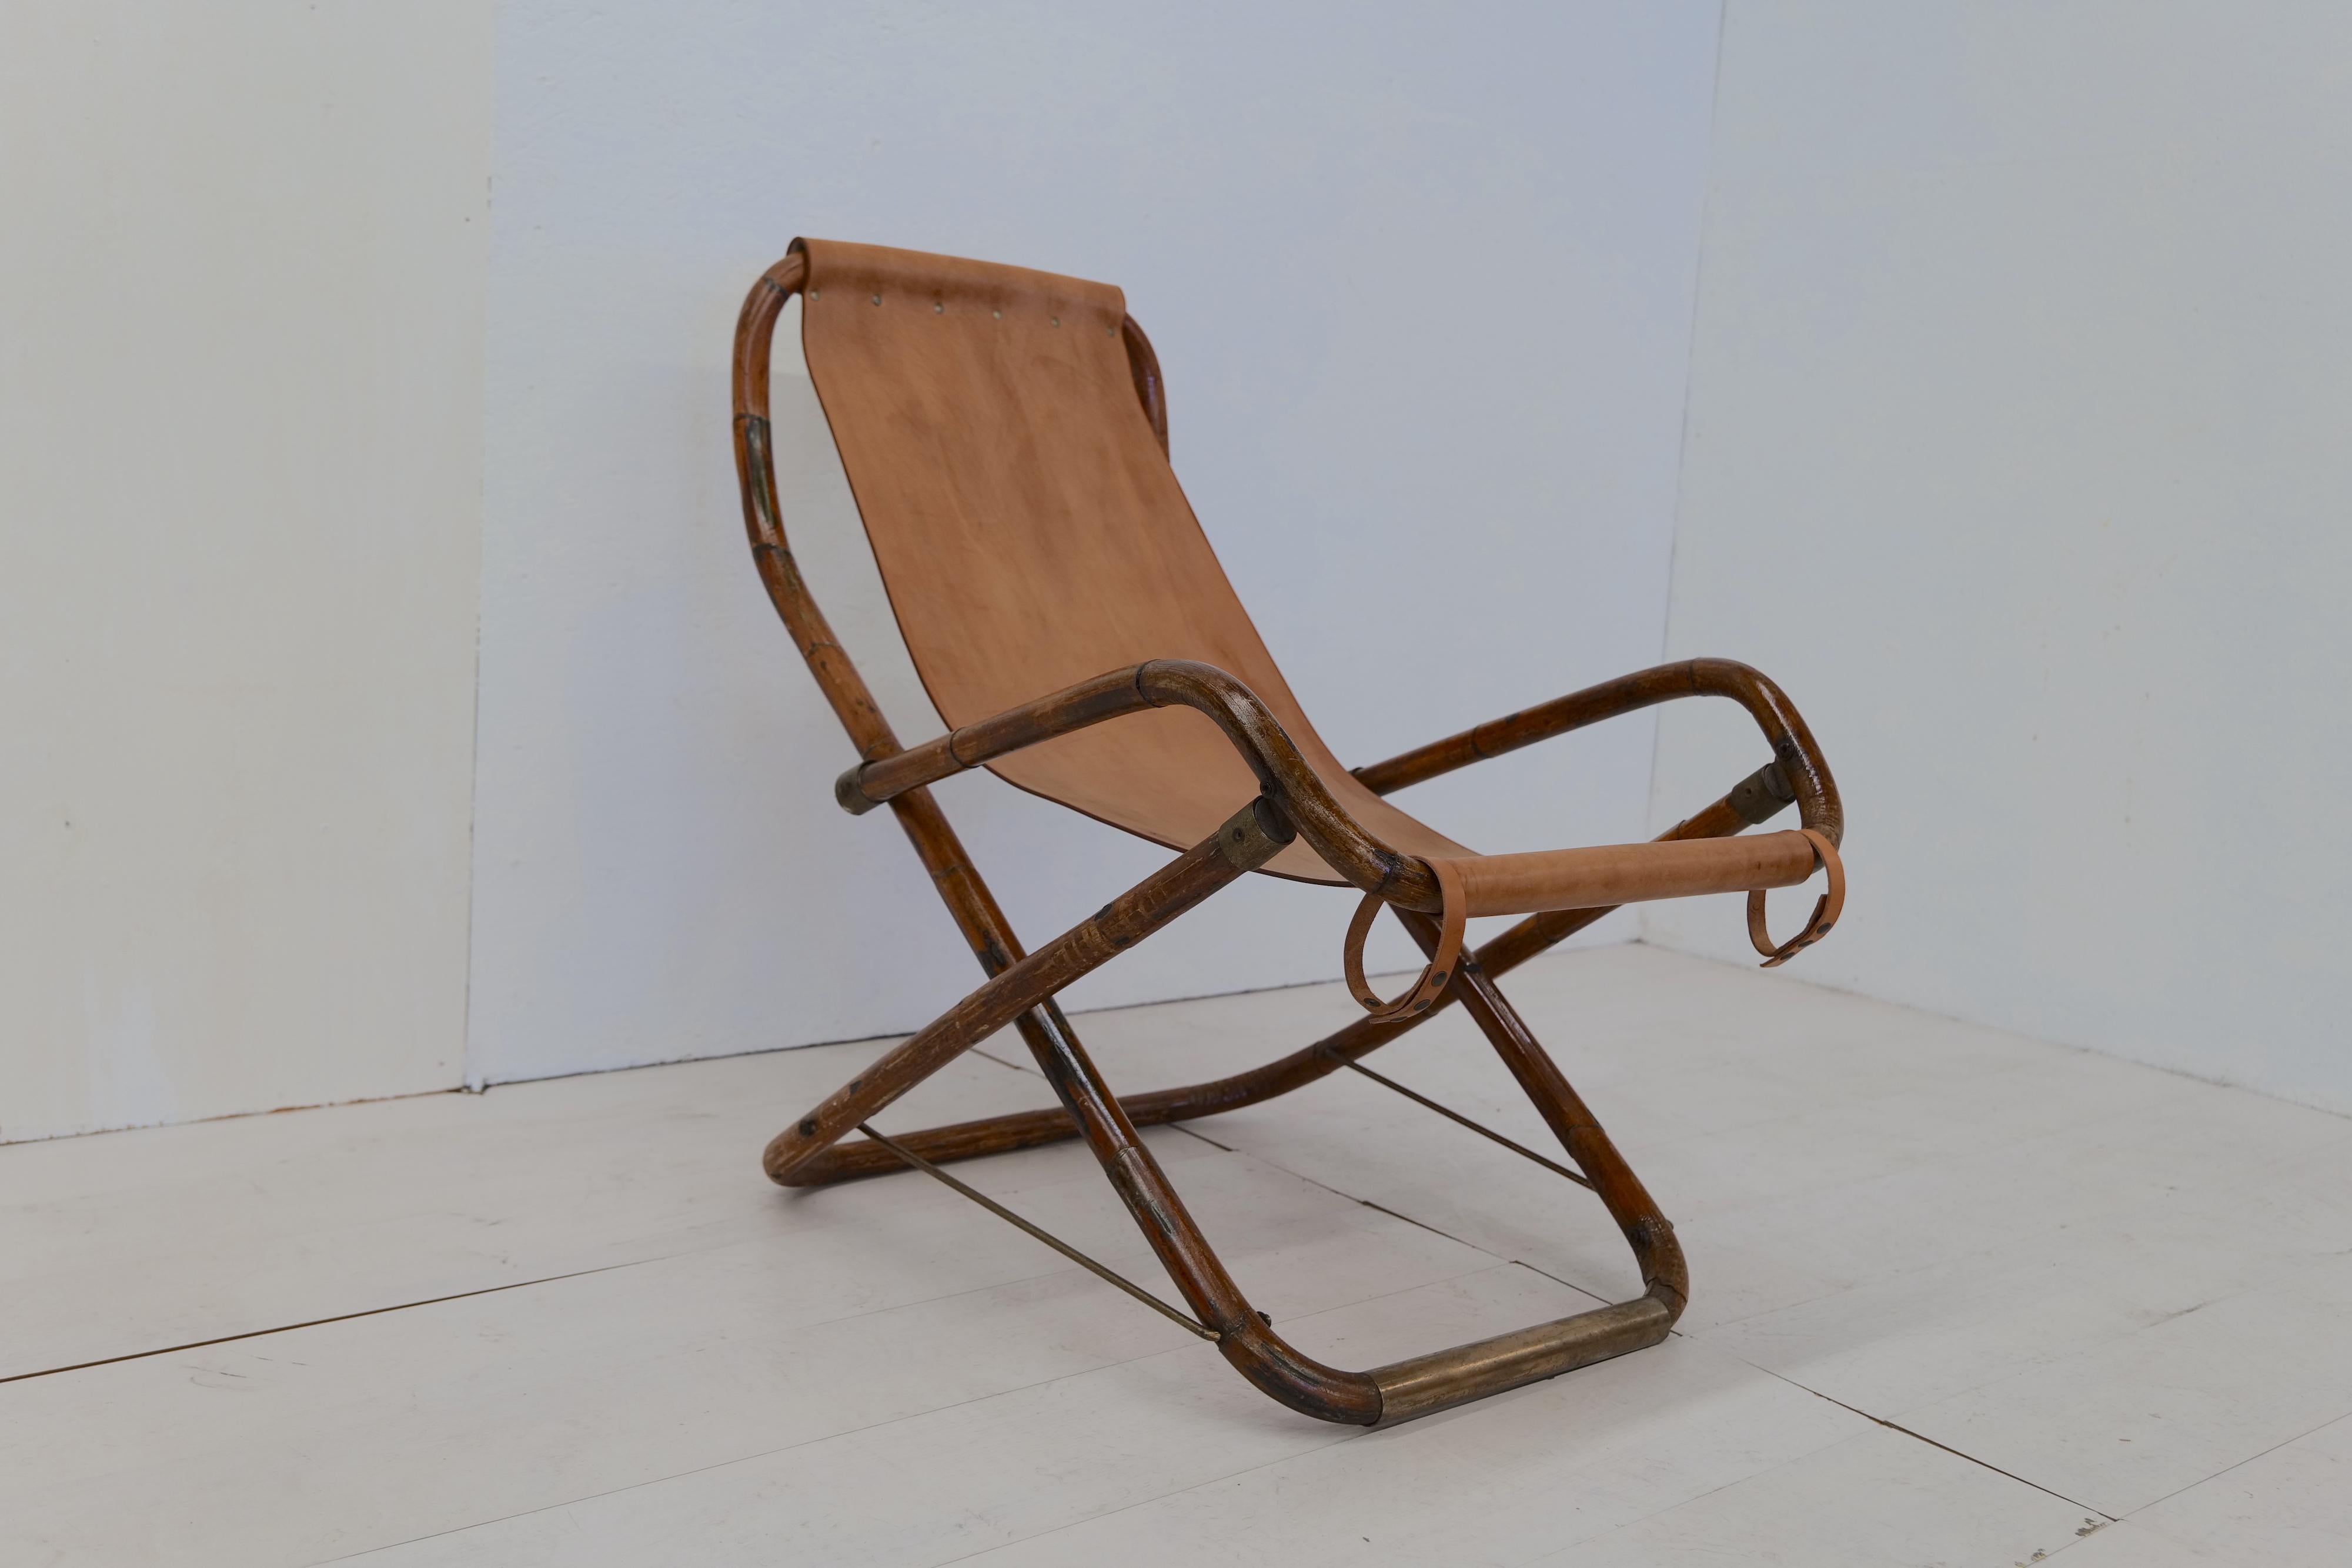 The Vintage Italian Leather and Wood Rocking Chair from the 1960s is a classic piece of furniture crafted in Italy. It features a sturdy wooden frame with elegant curves and detailing, combined with a comfortable seat and backrest upholstered in